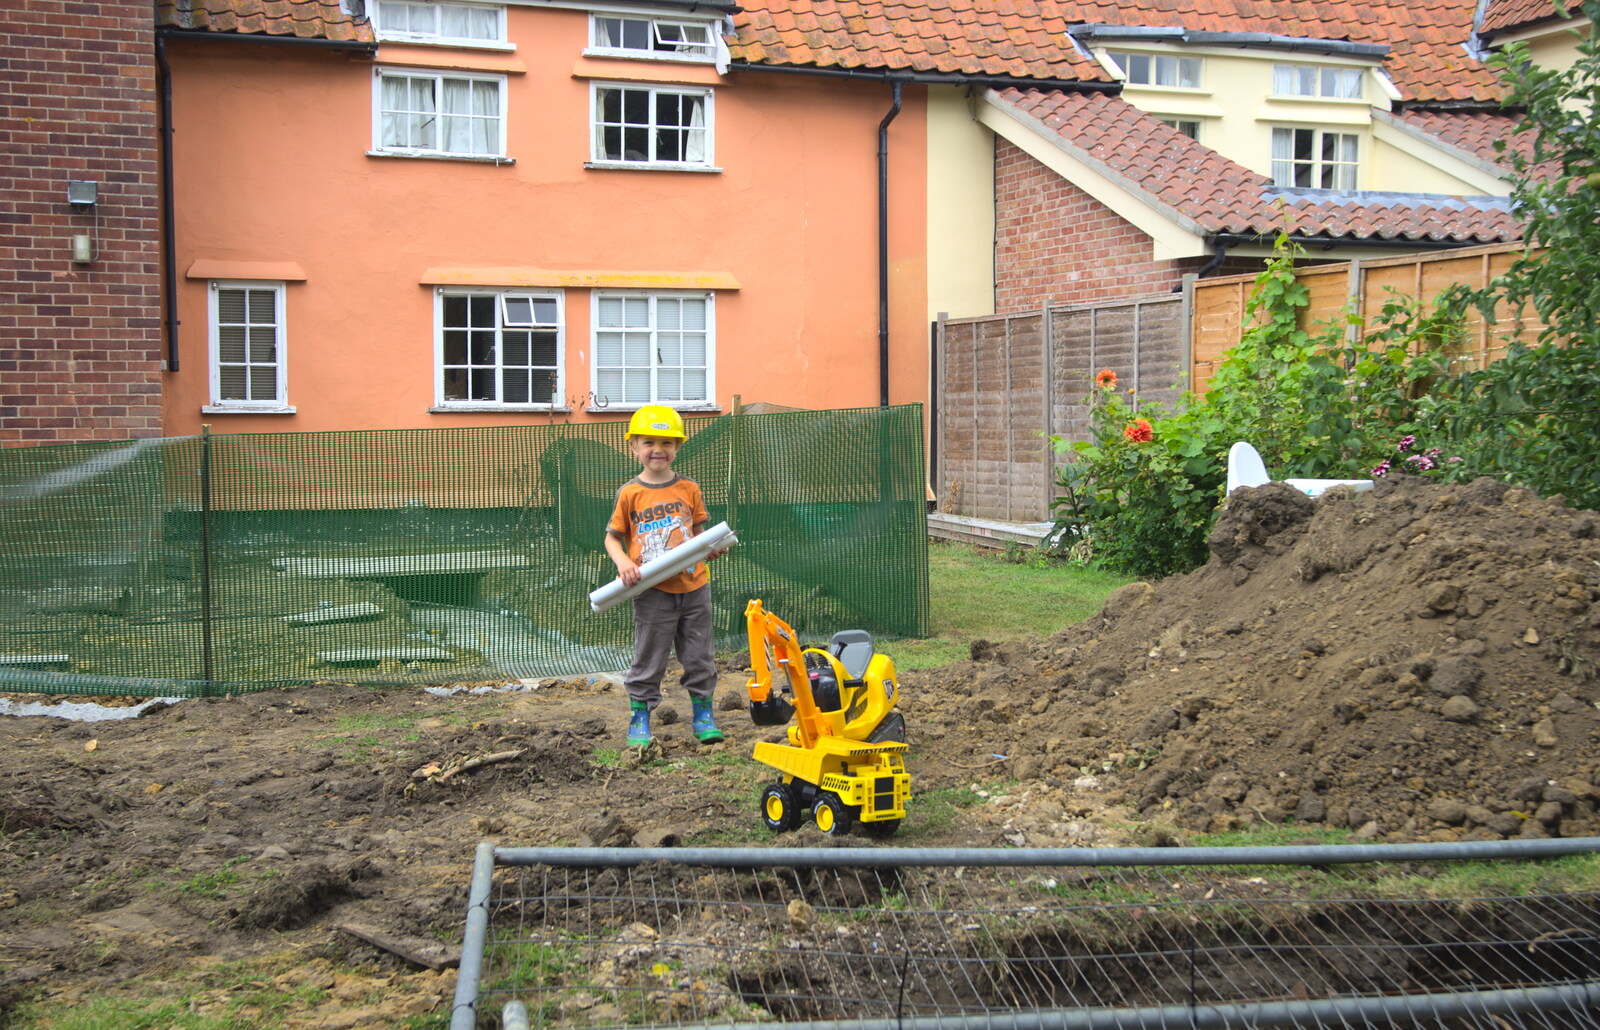 Fred looks like a real builder, with plans from Grand Designs: Building Commences, Brome, Suffolk - 8th August 2013